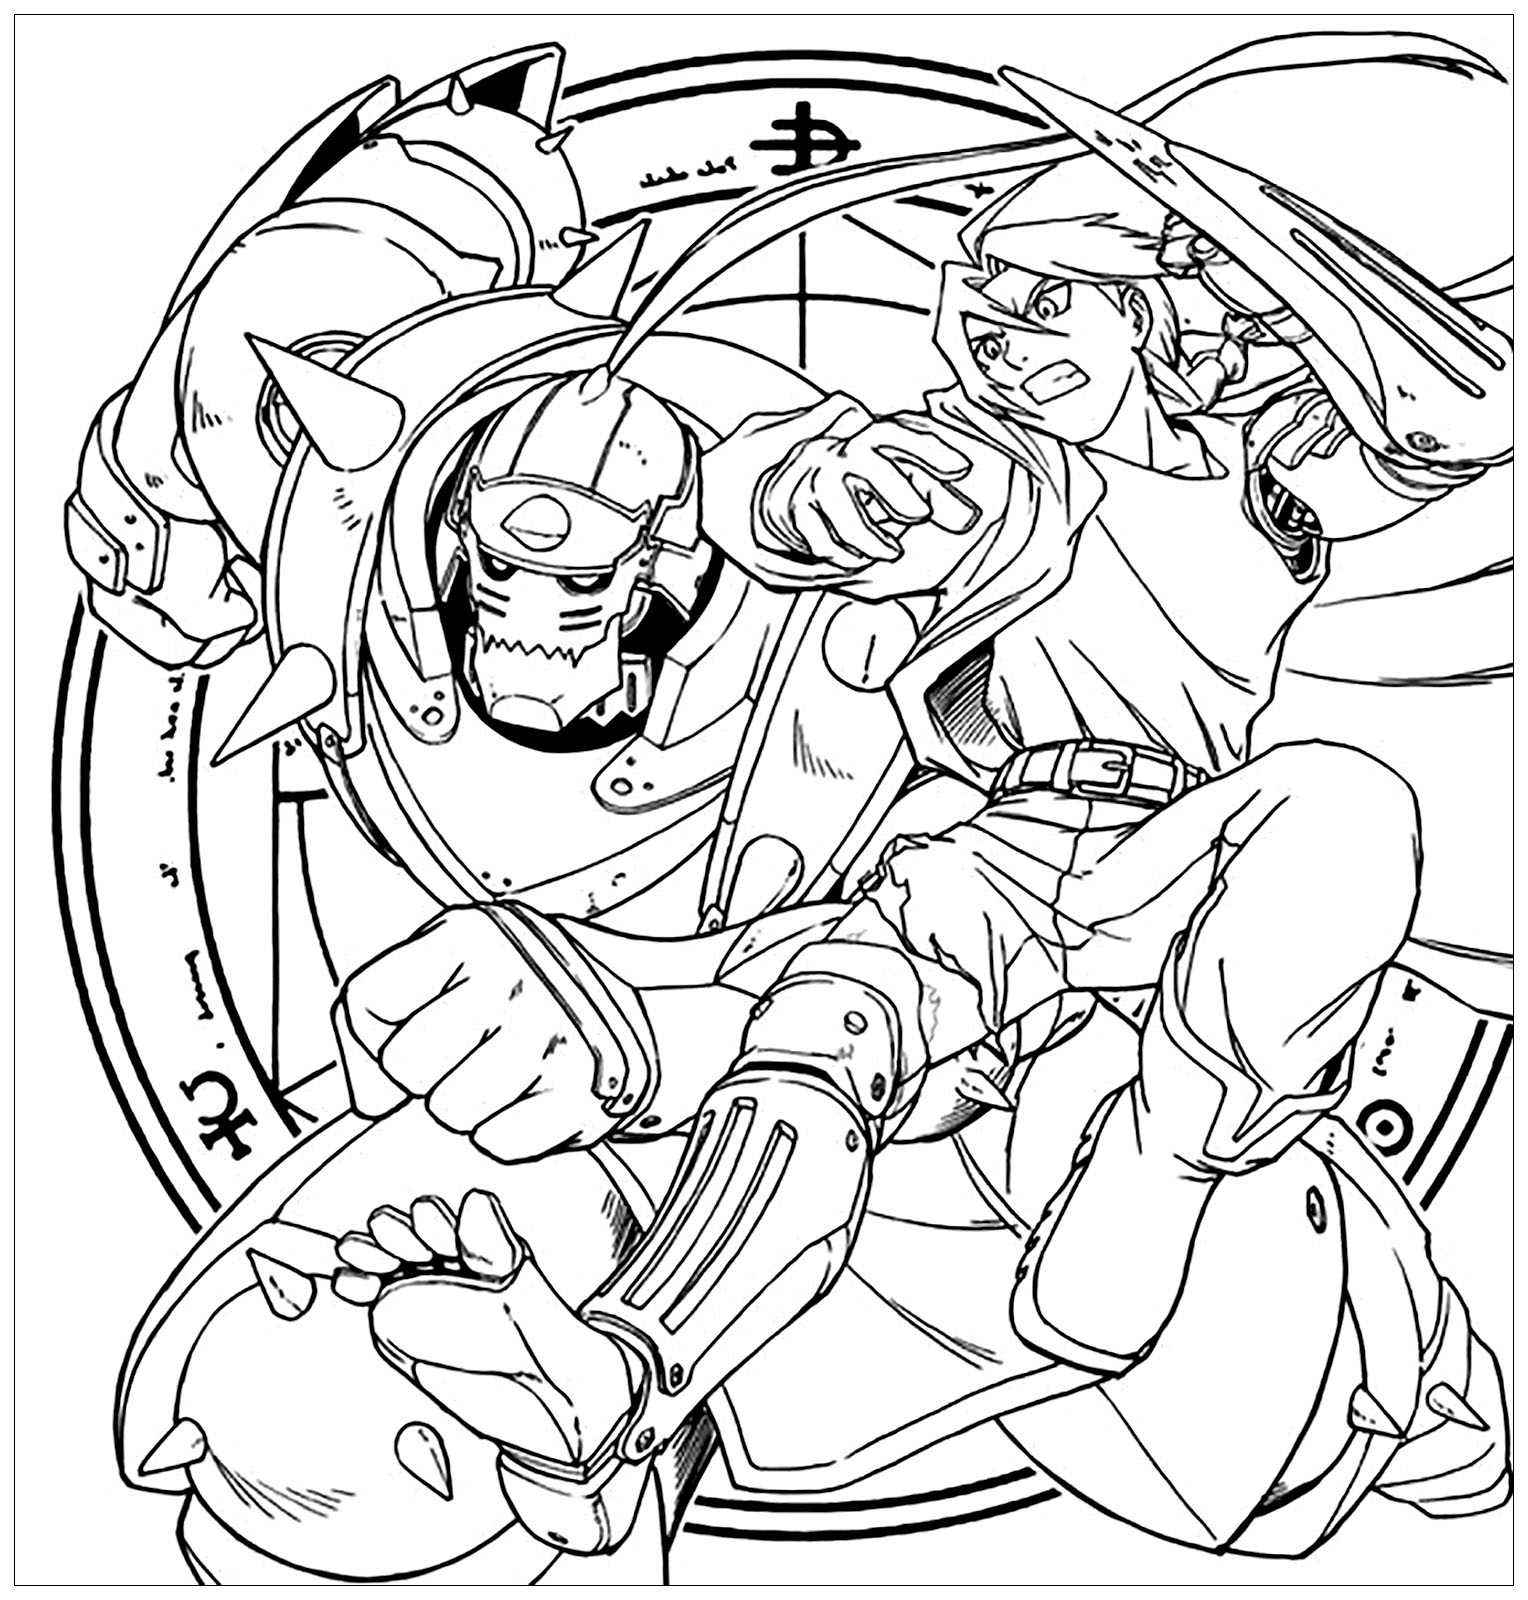 Full Metal Alchemist coloring pages to print for kids